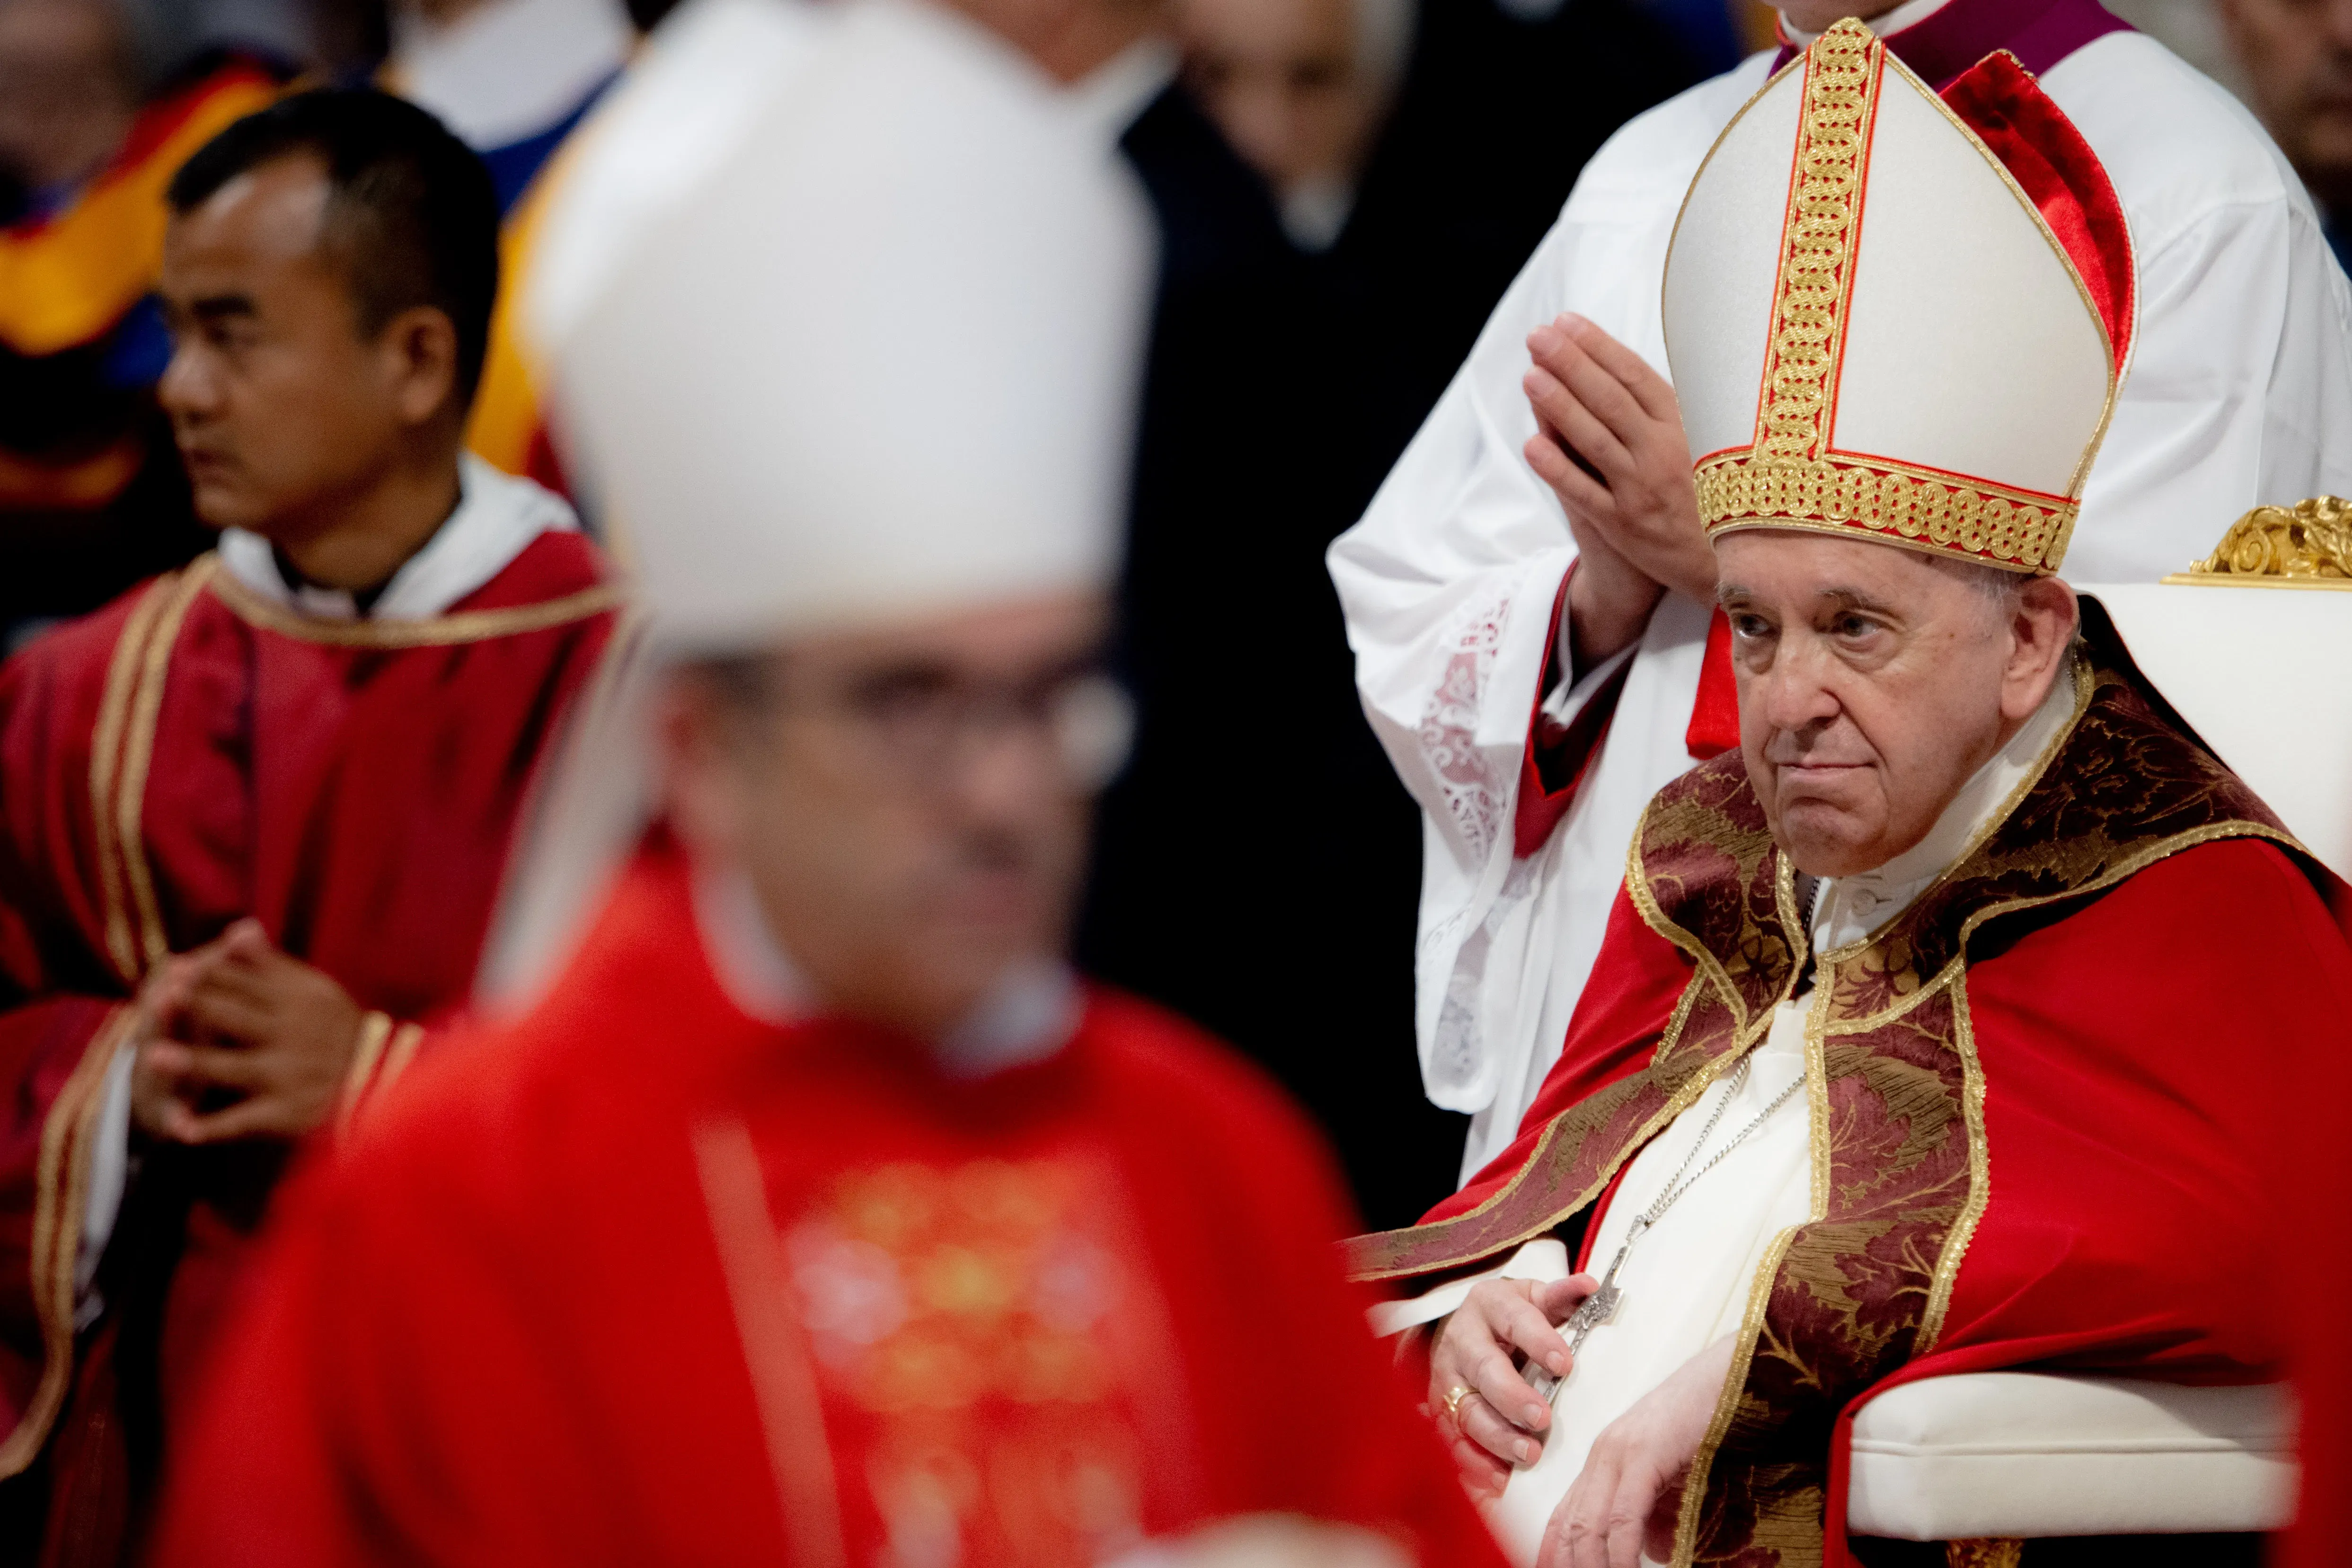 Pope Francis at a Mass for the feast of Ss. Peter and Paul in St. Peter's Basilica, June 29, 2022. Daniel Ibanez/CNA.